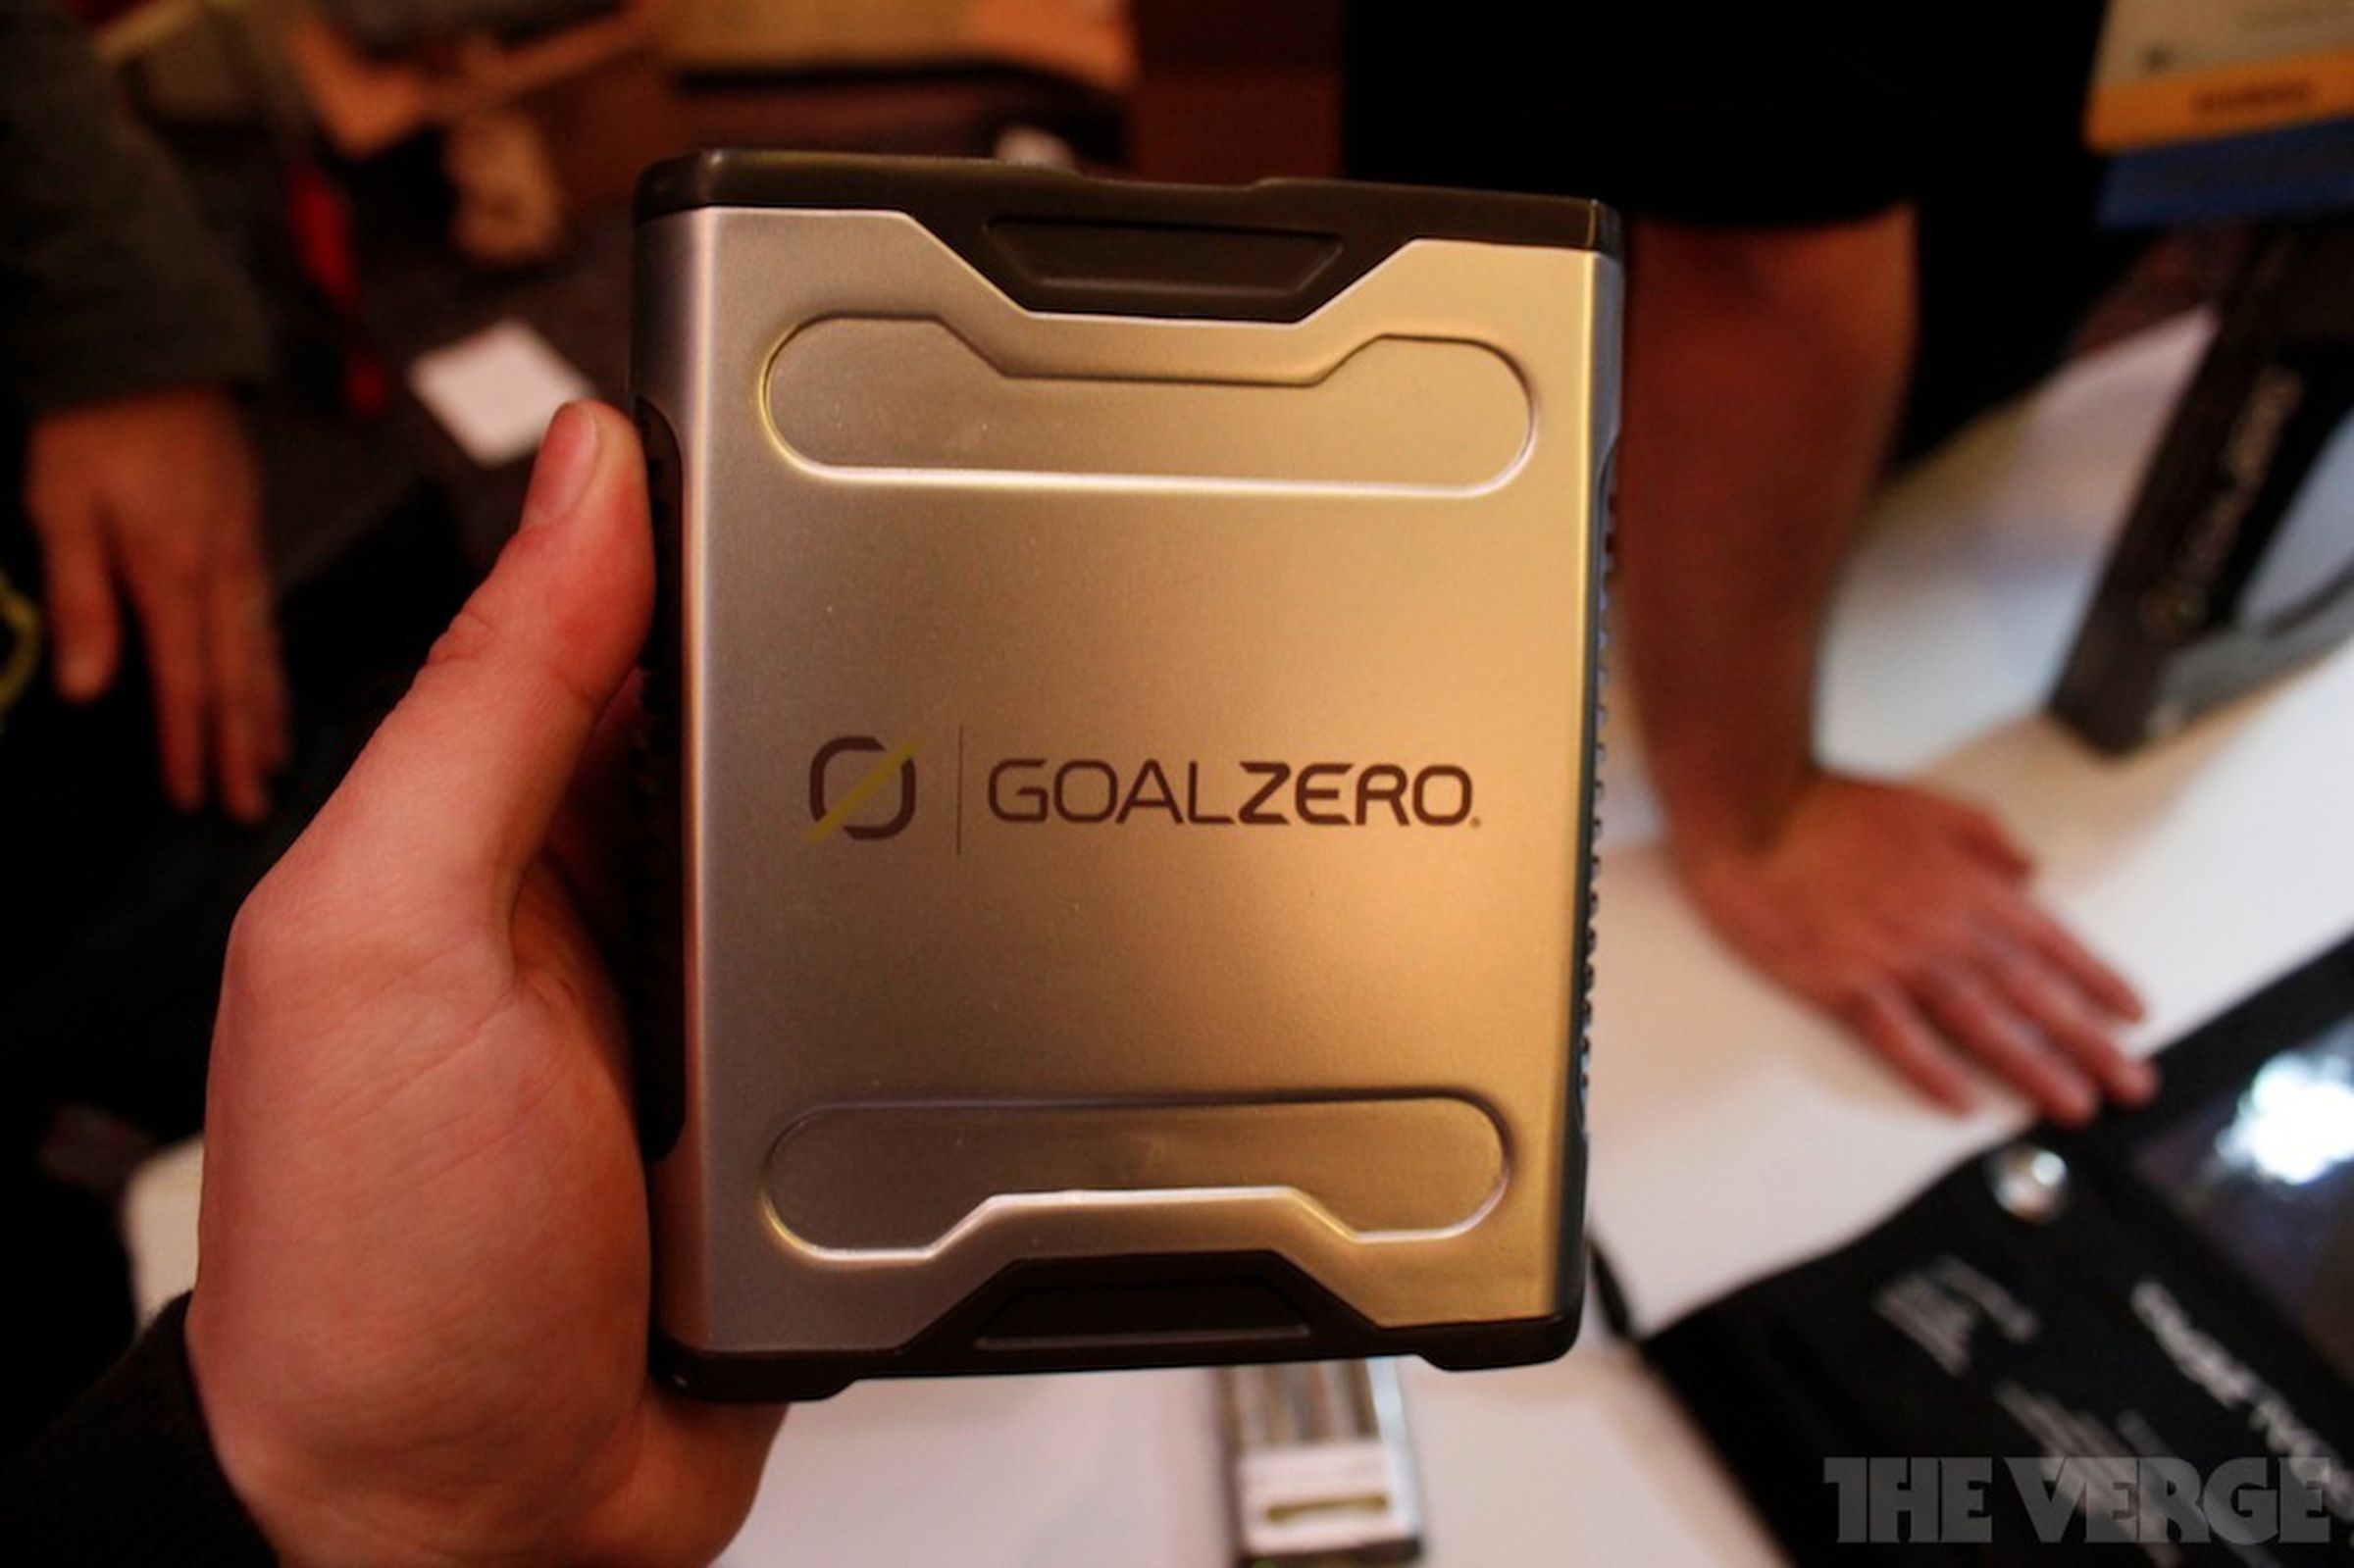 Goal Zero Sherpa 50 battery pack pictures